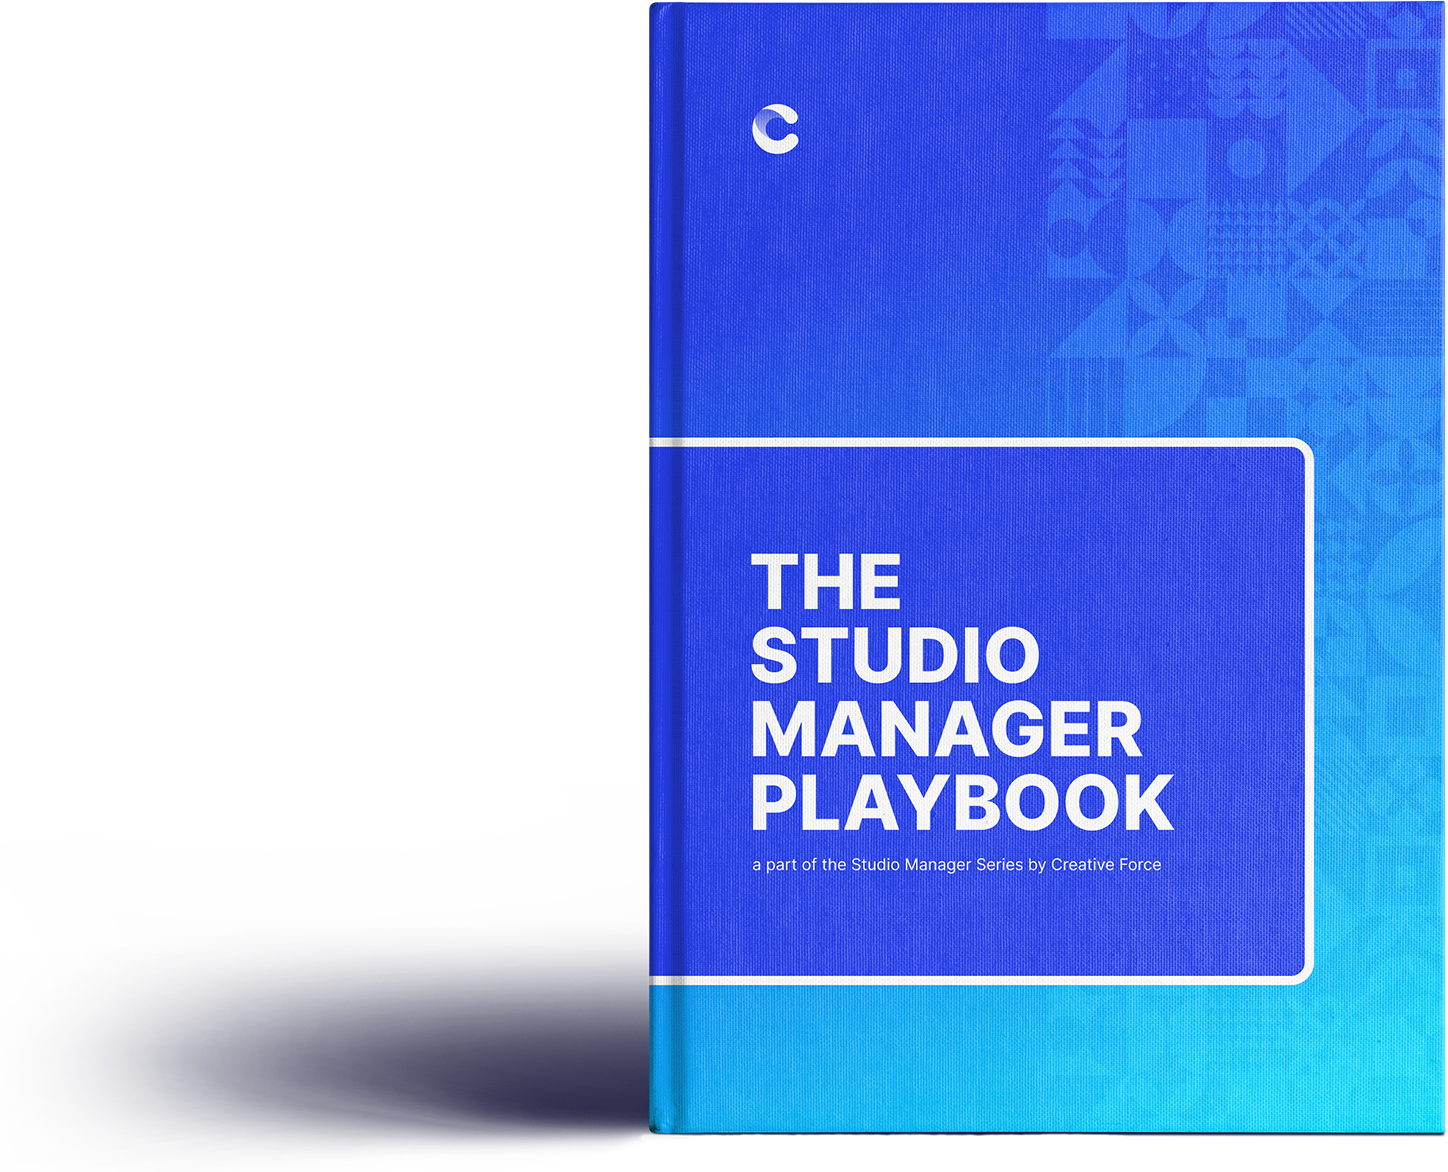 The Studio Manager Playbook Mockup